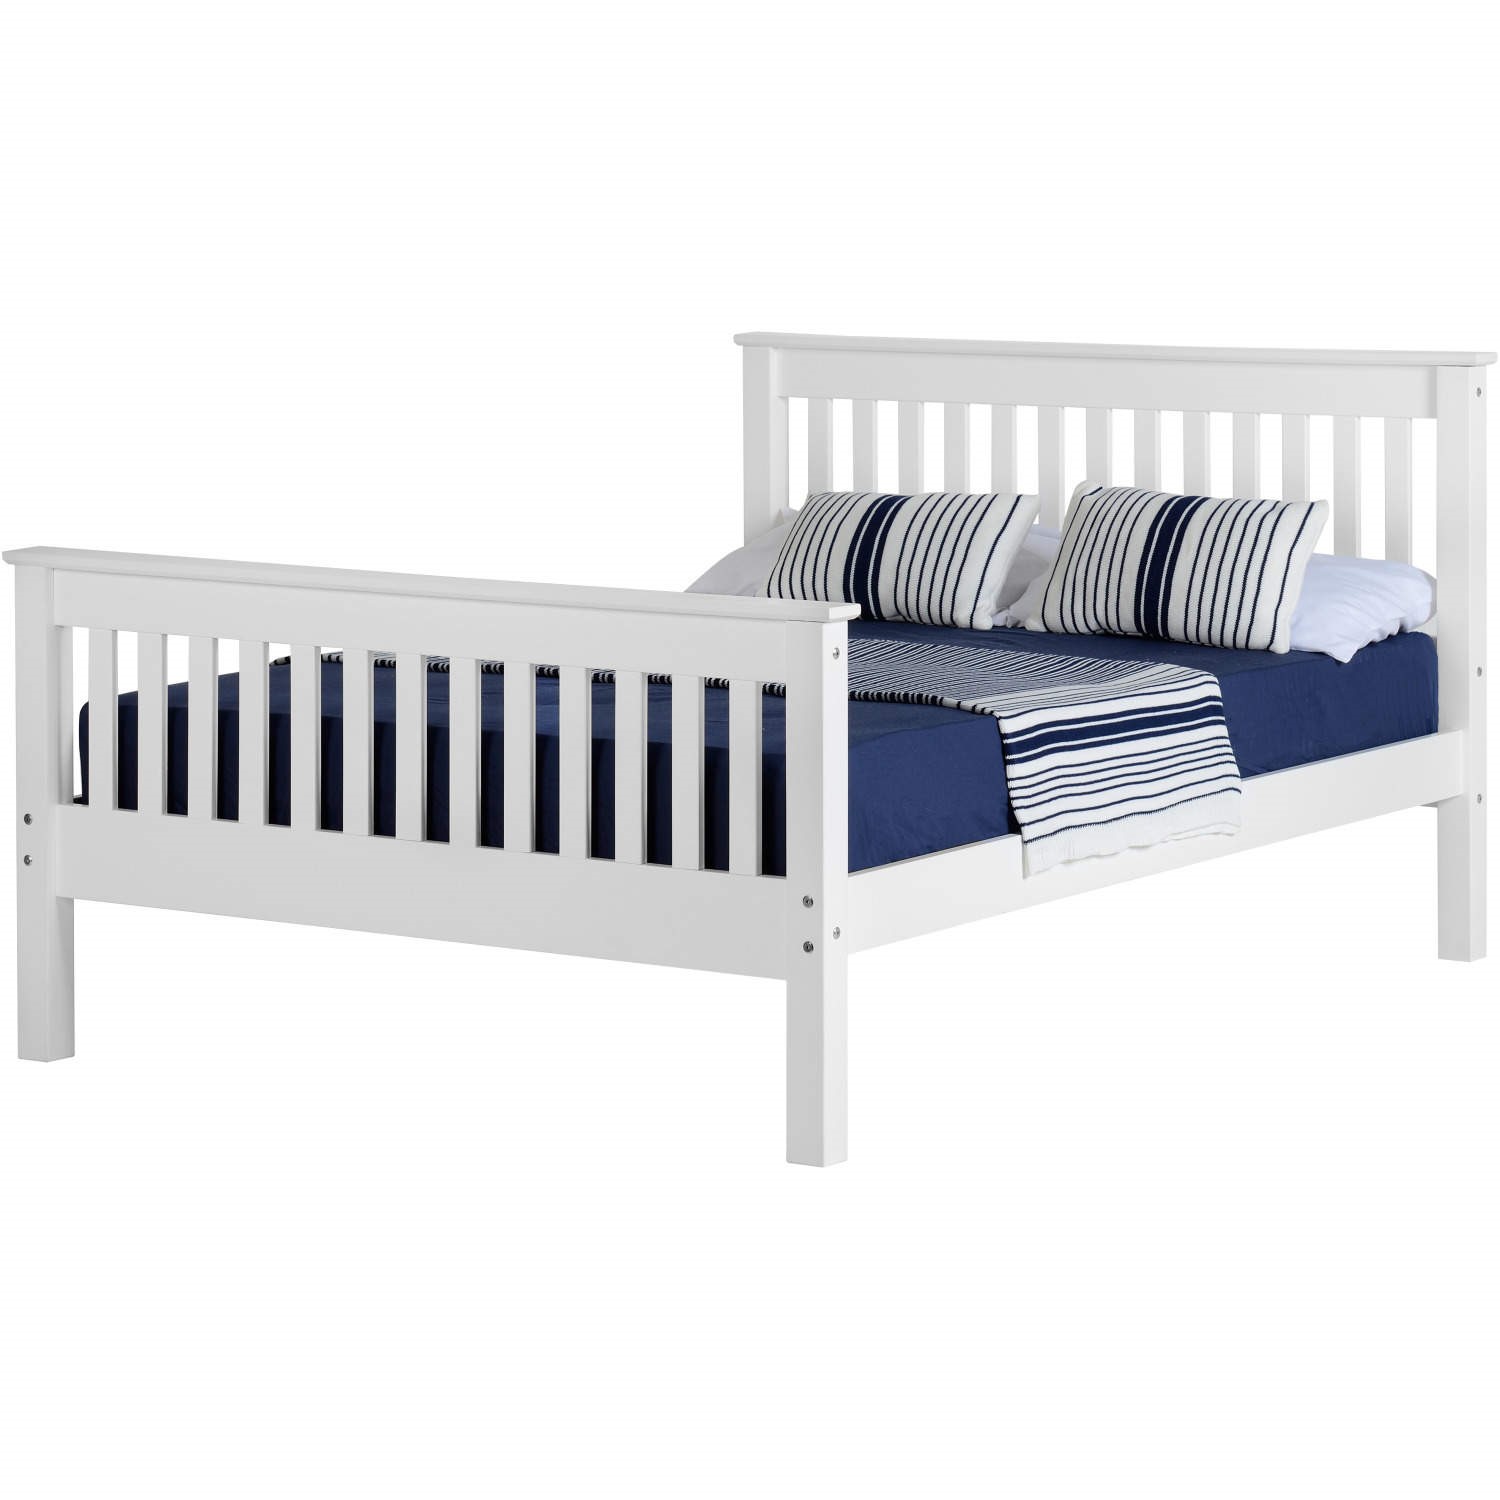 Seconique Monaco King Size Bed Frame In, White Shaker Style Double Bed Frame